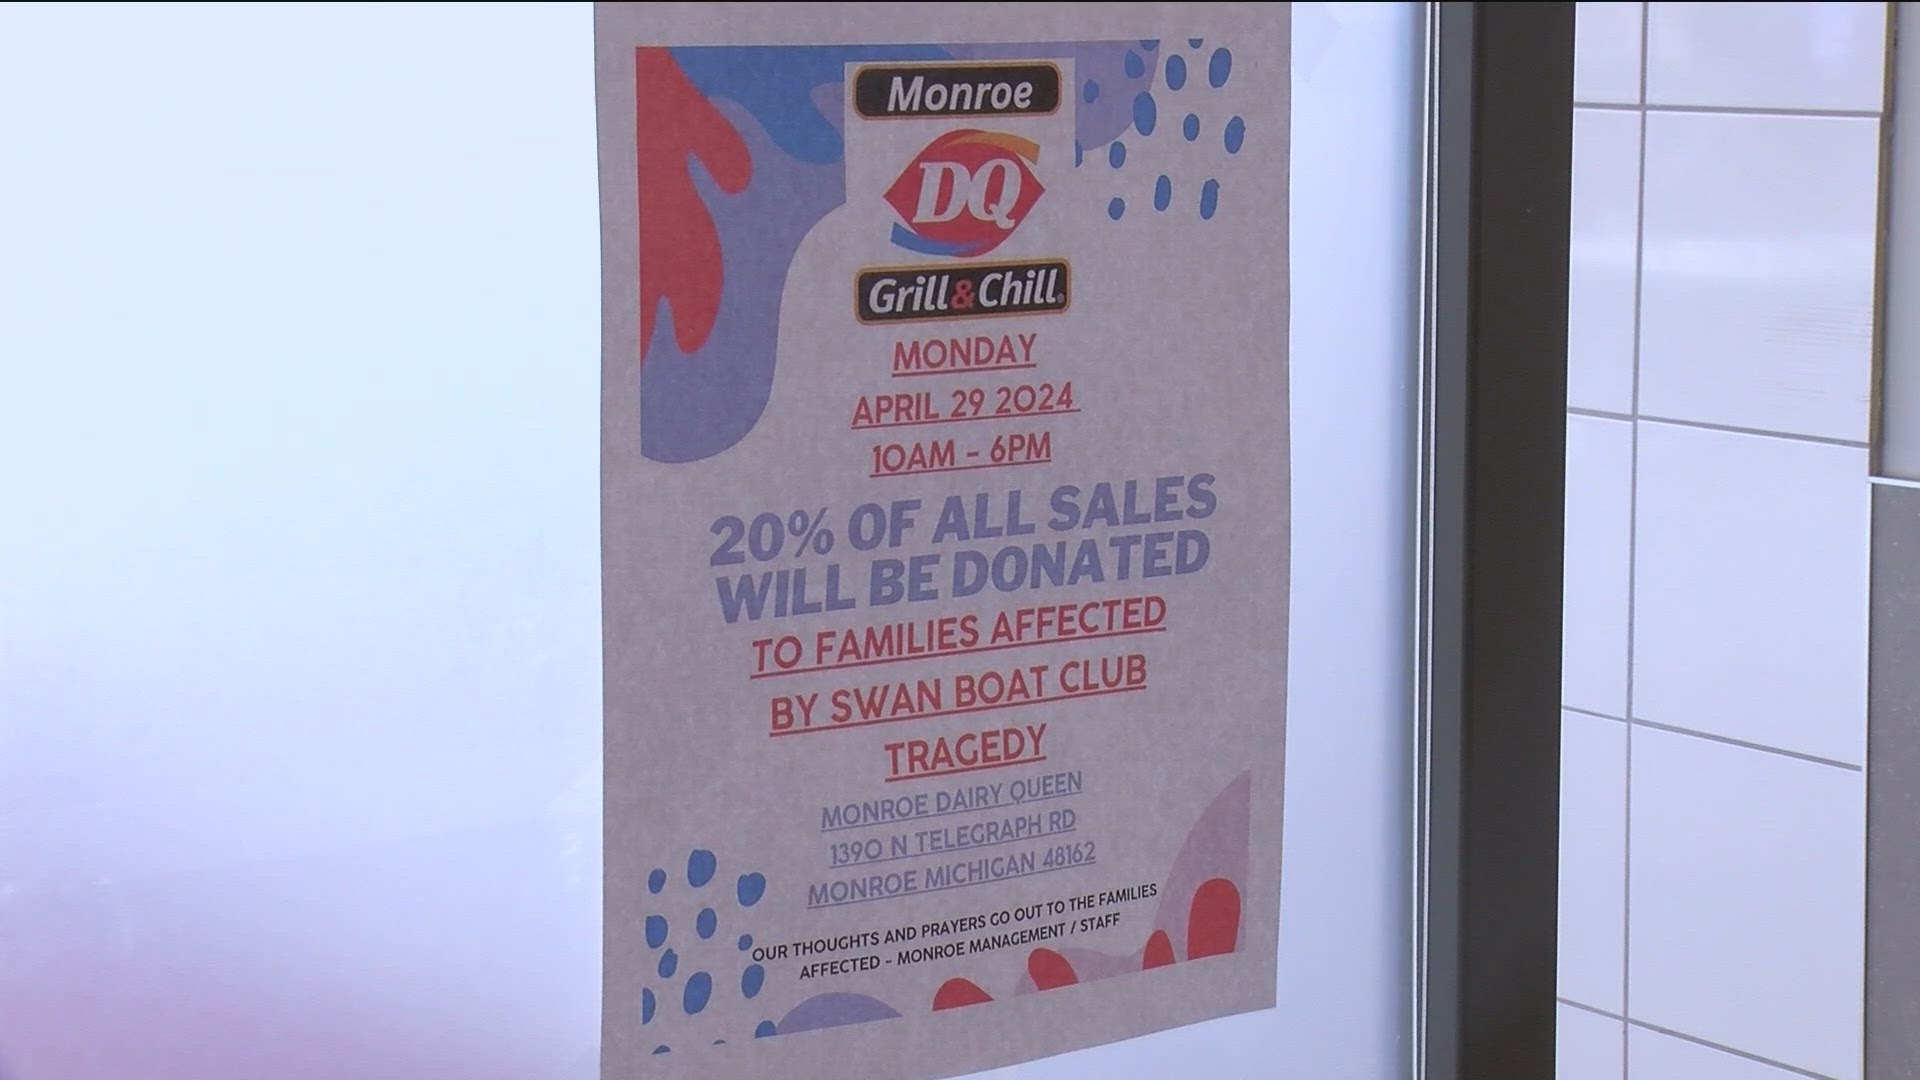 Dairy Queen donated 20% of its sales Monday that will go directly to those affected in the fatal crash at the Swan Boat Club.